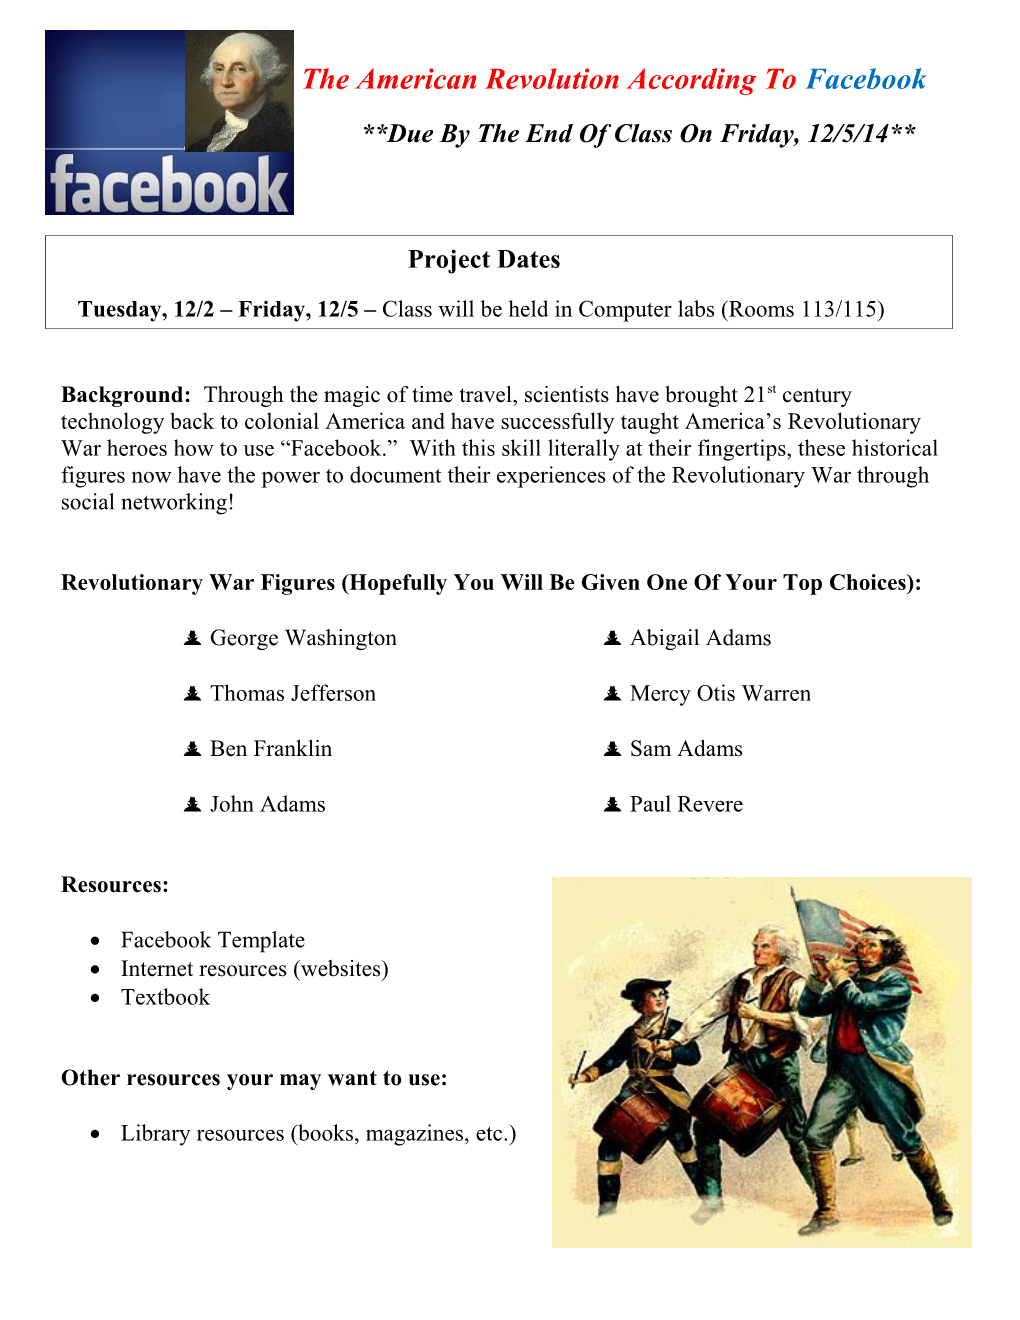 Revolutionary War Figures (Hopefully You Will Be Given One of Your Top Choices)